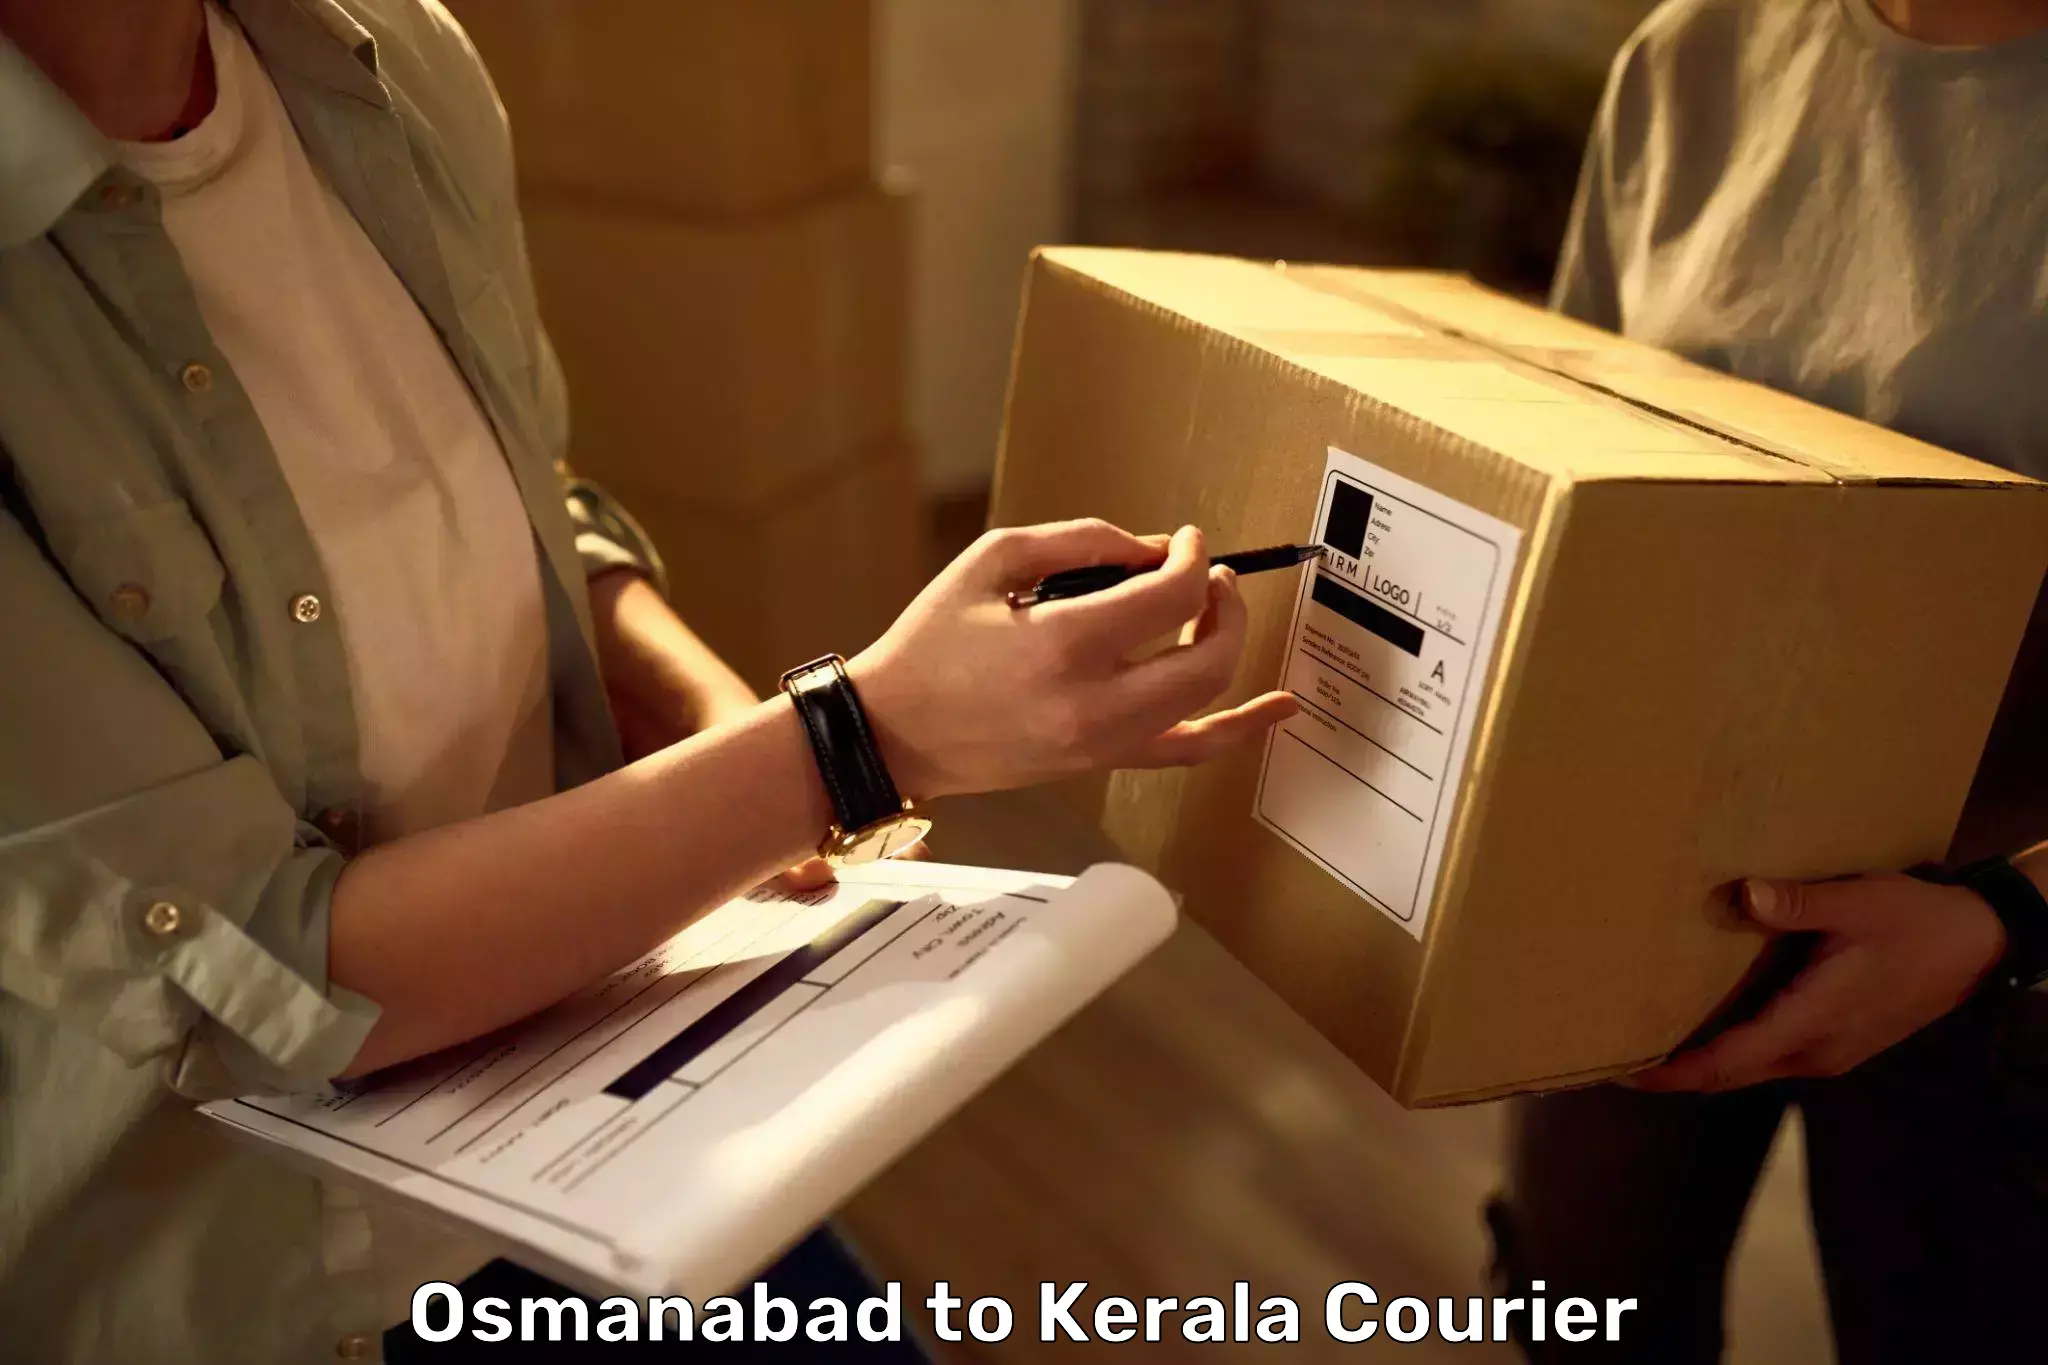 Luggage transport consultancy Osmanabad to Kerala